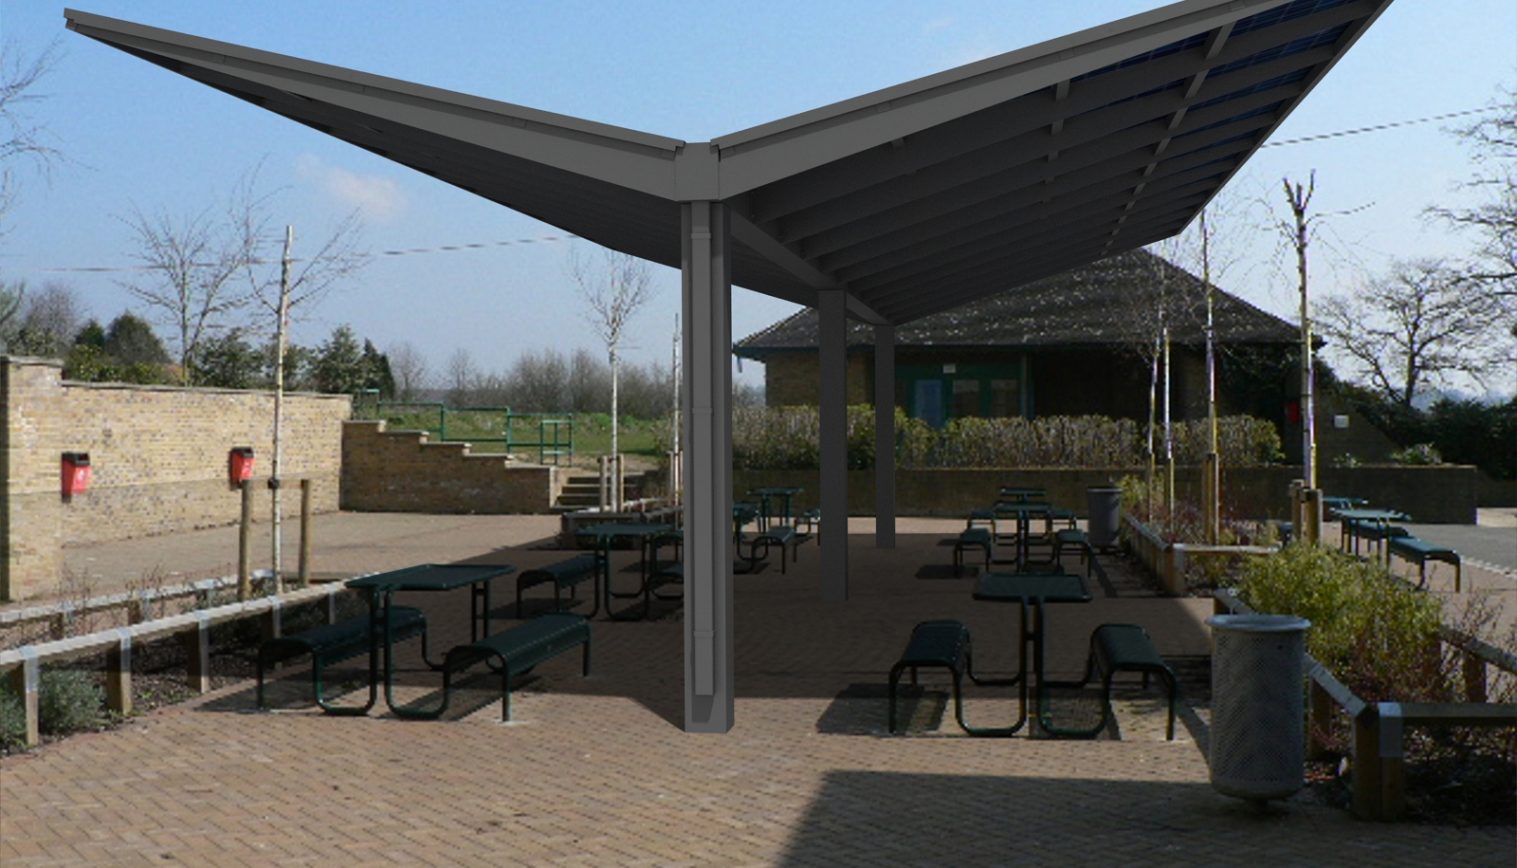 The Benefits of Solar Canopies